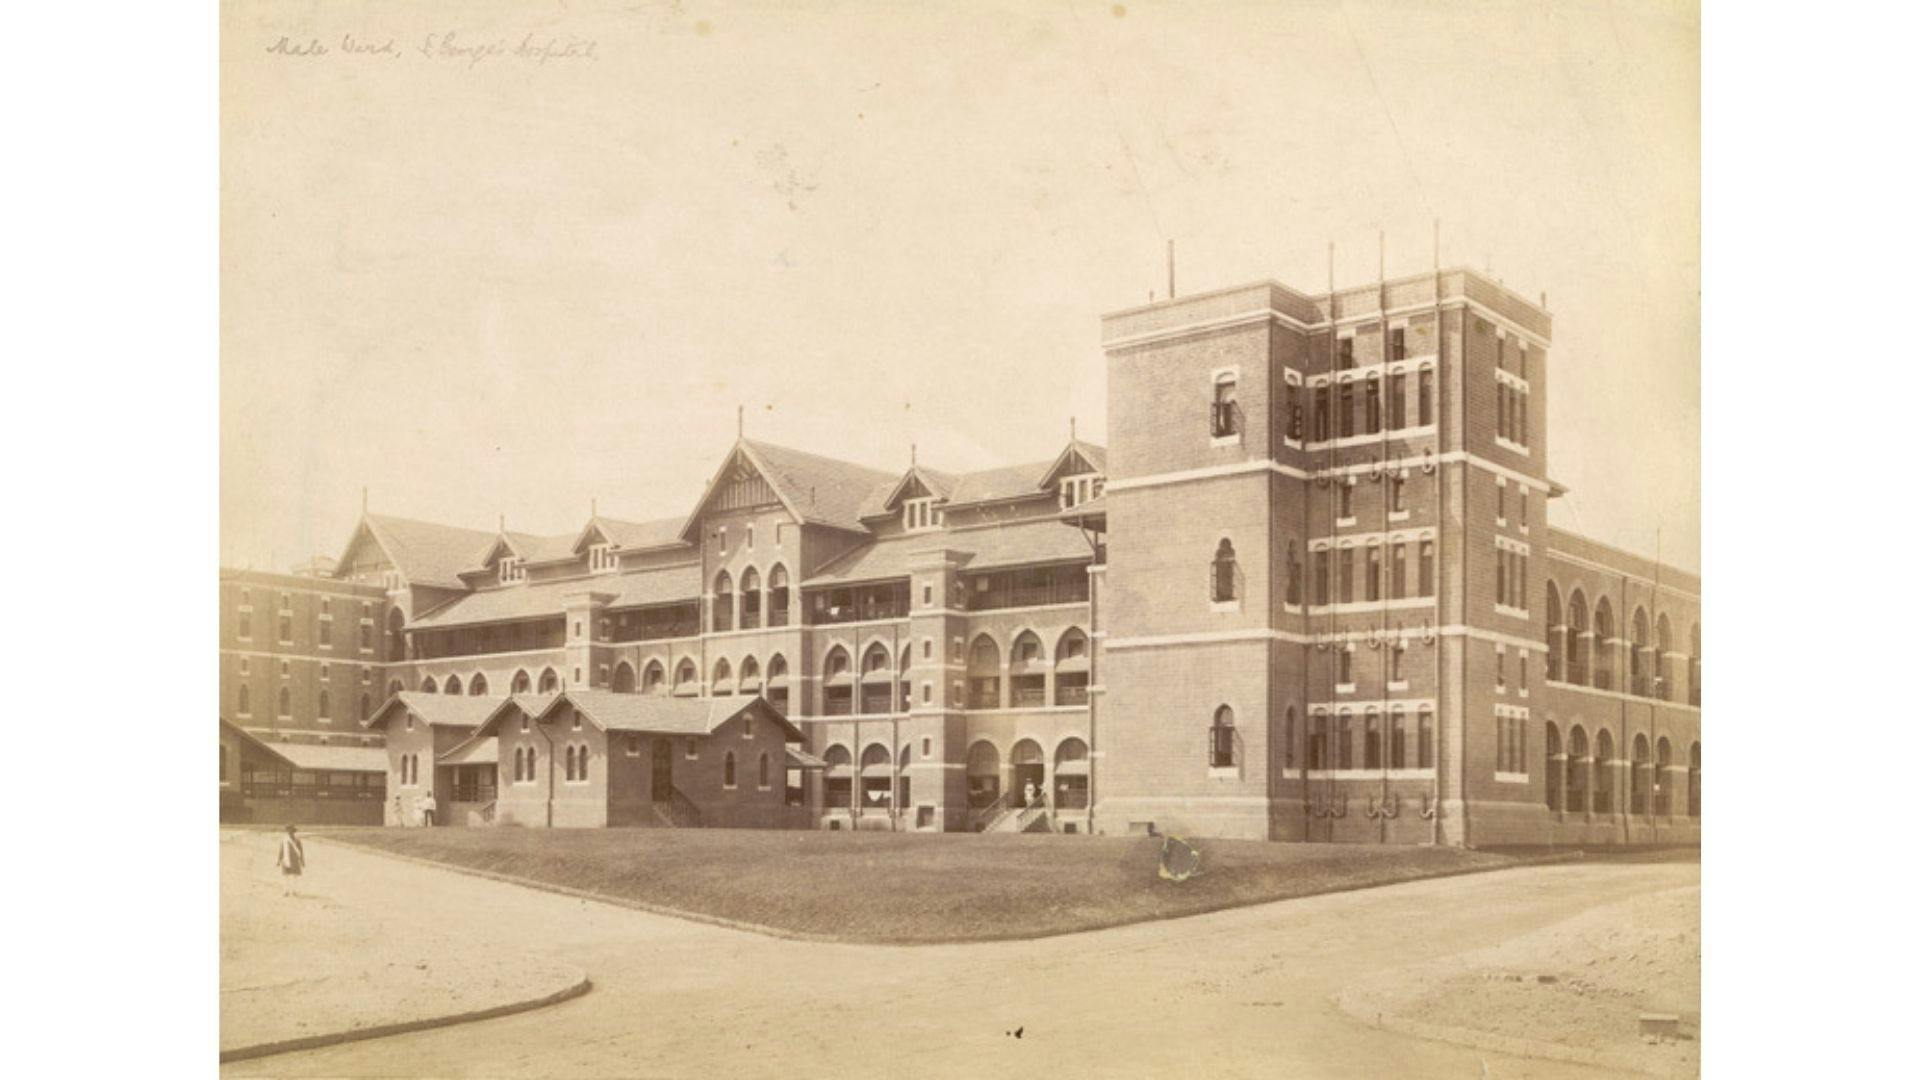 St George's Hospital in Bombay (1890)